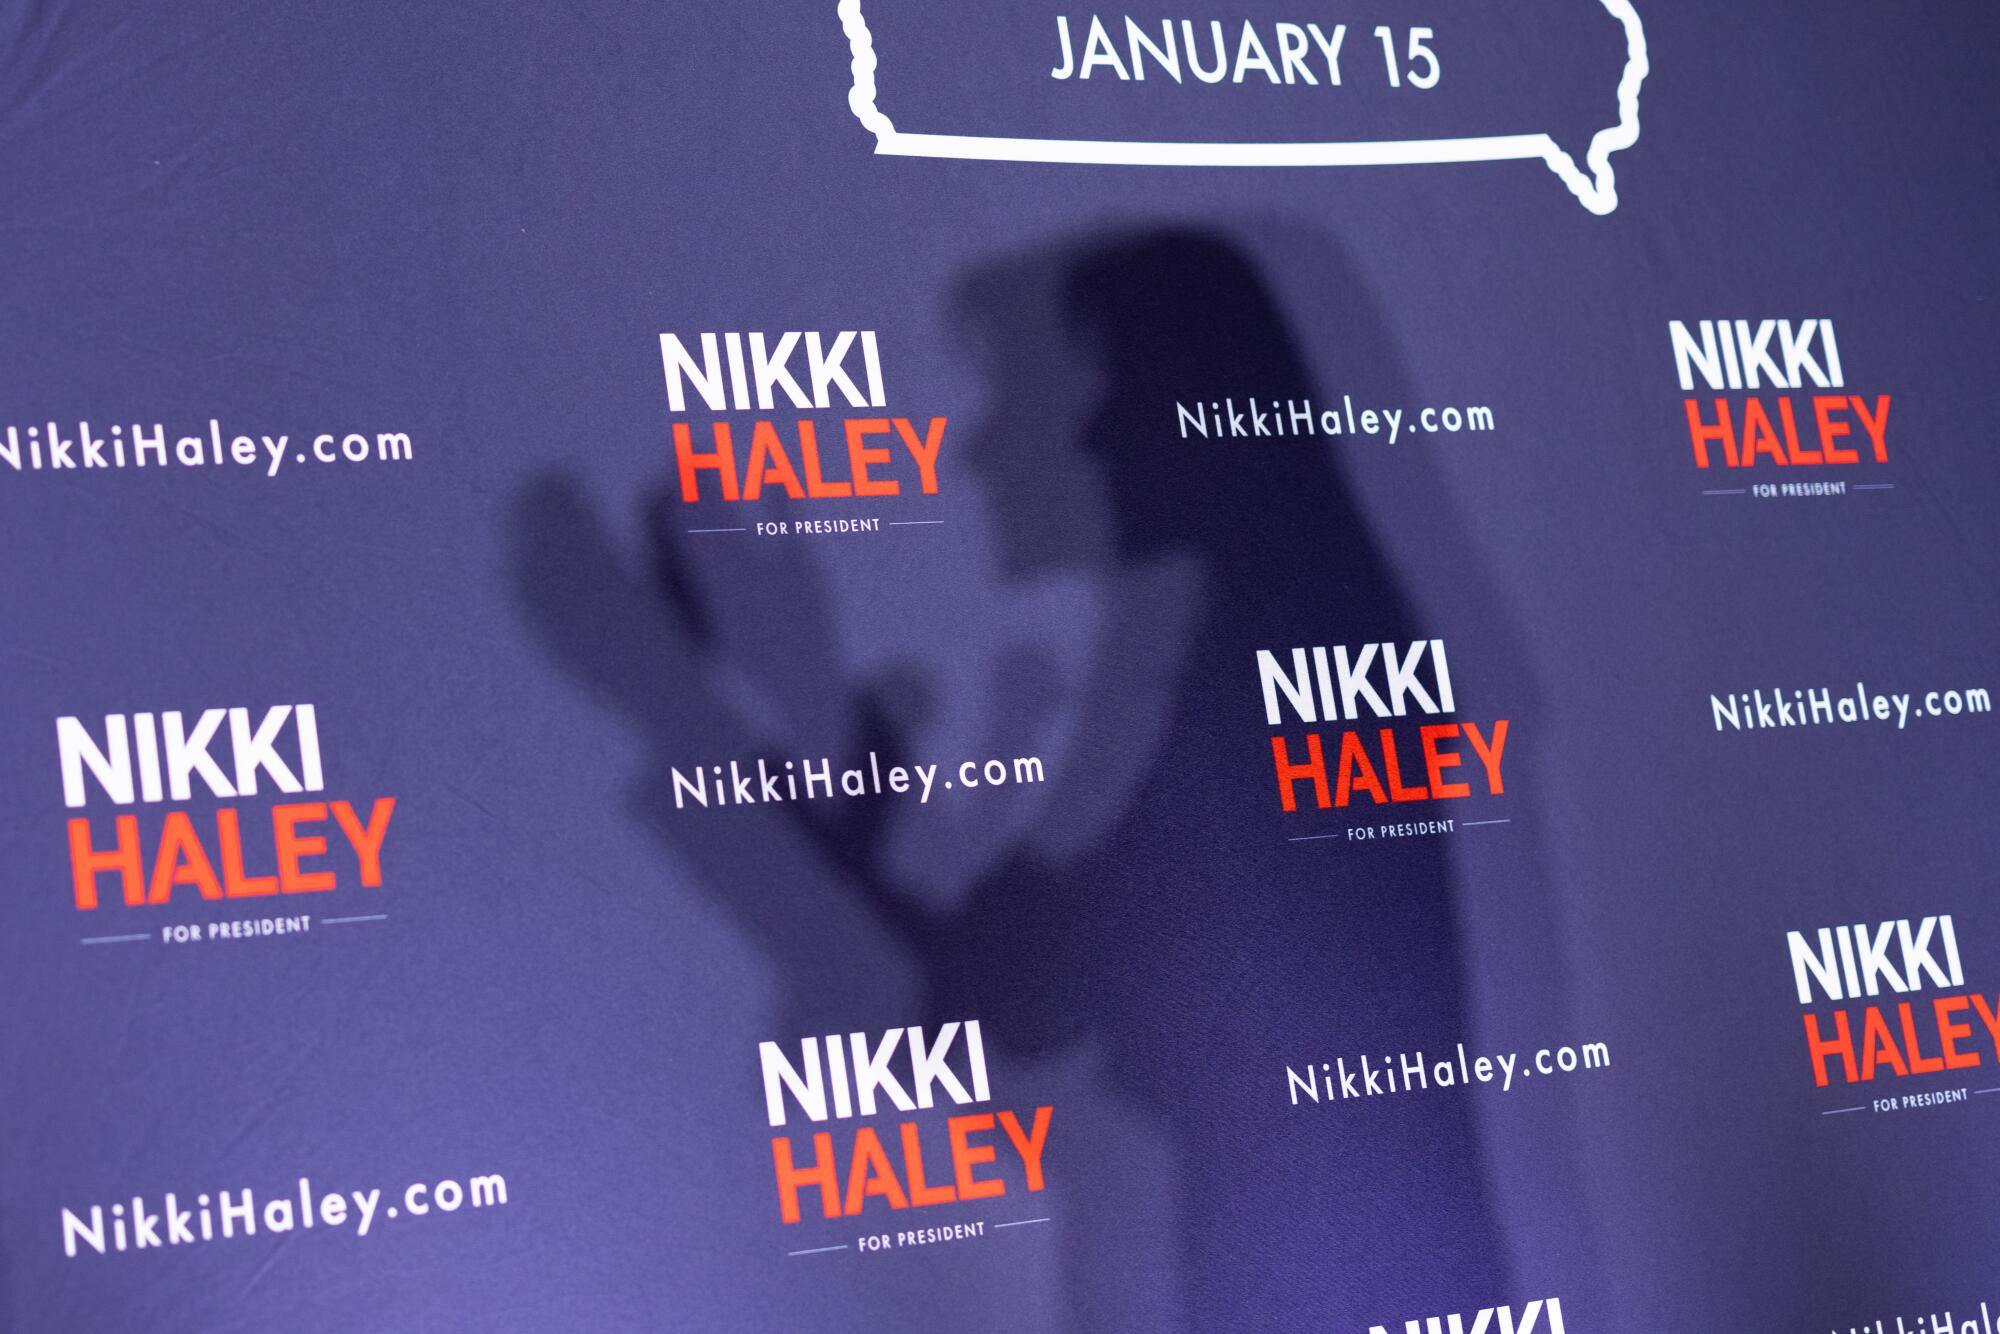 Nikki Haley's shadow on the wall behind her as she speaks at a campaign event.